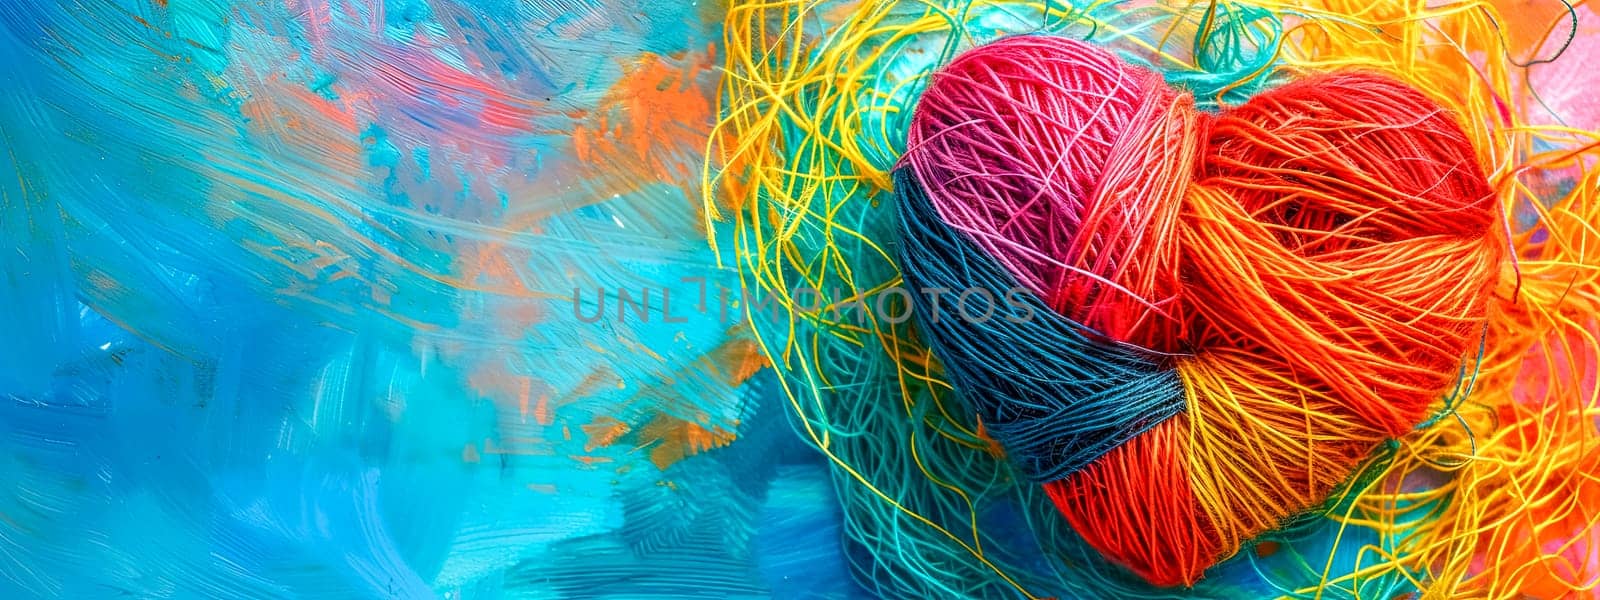 Two balls of yarn in the shape of a heart on a colorful background by Edophoto